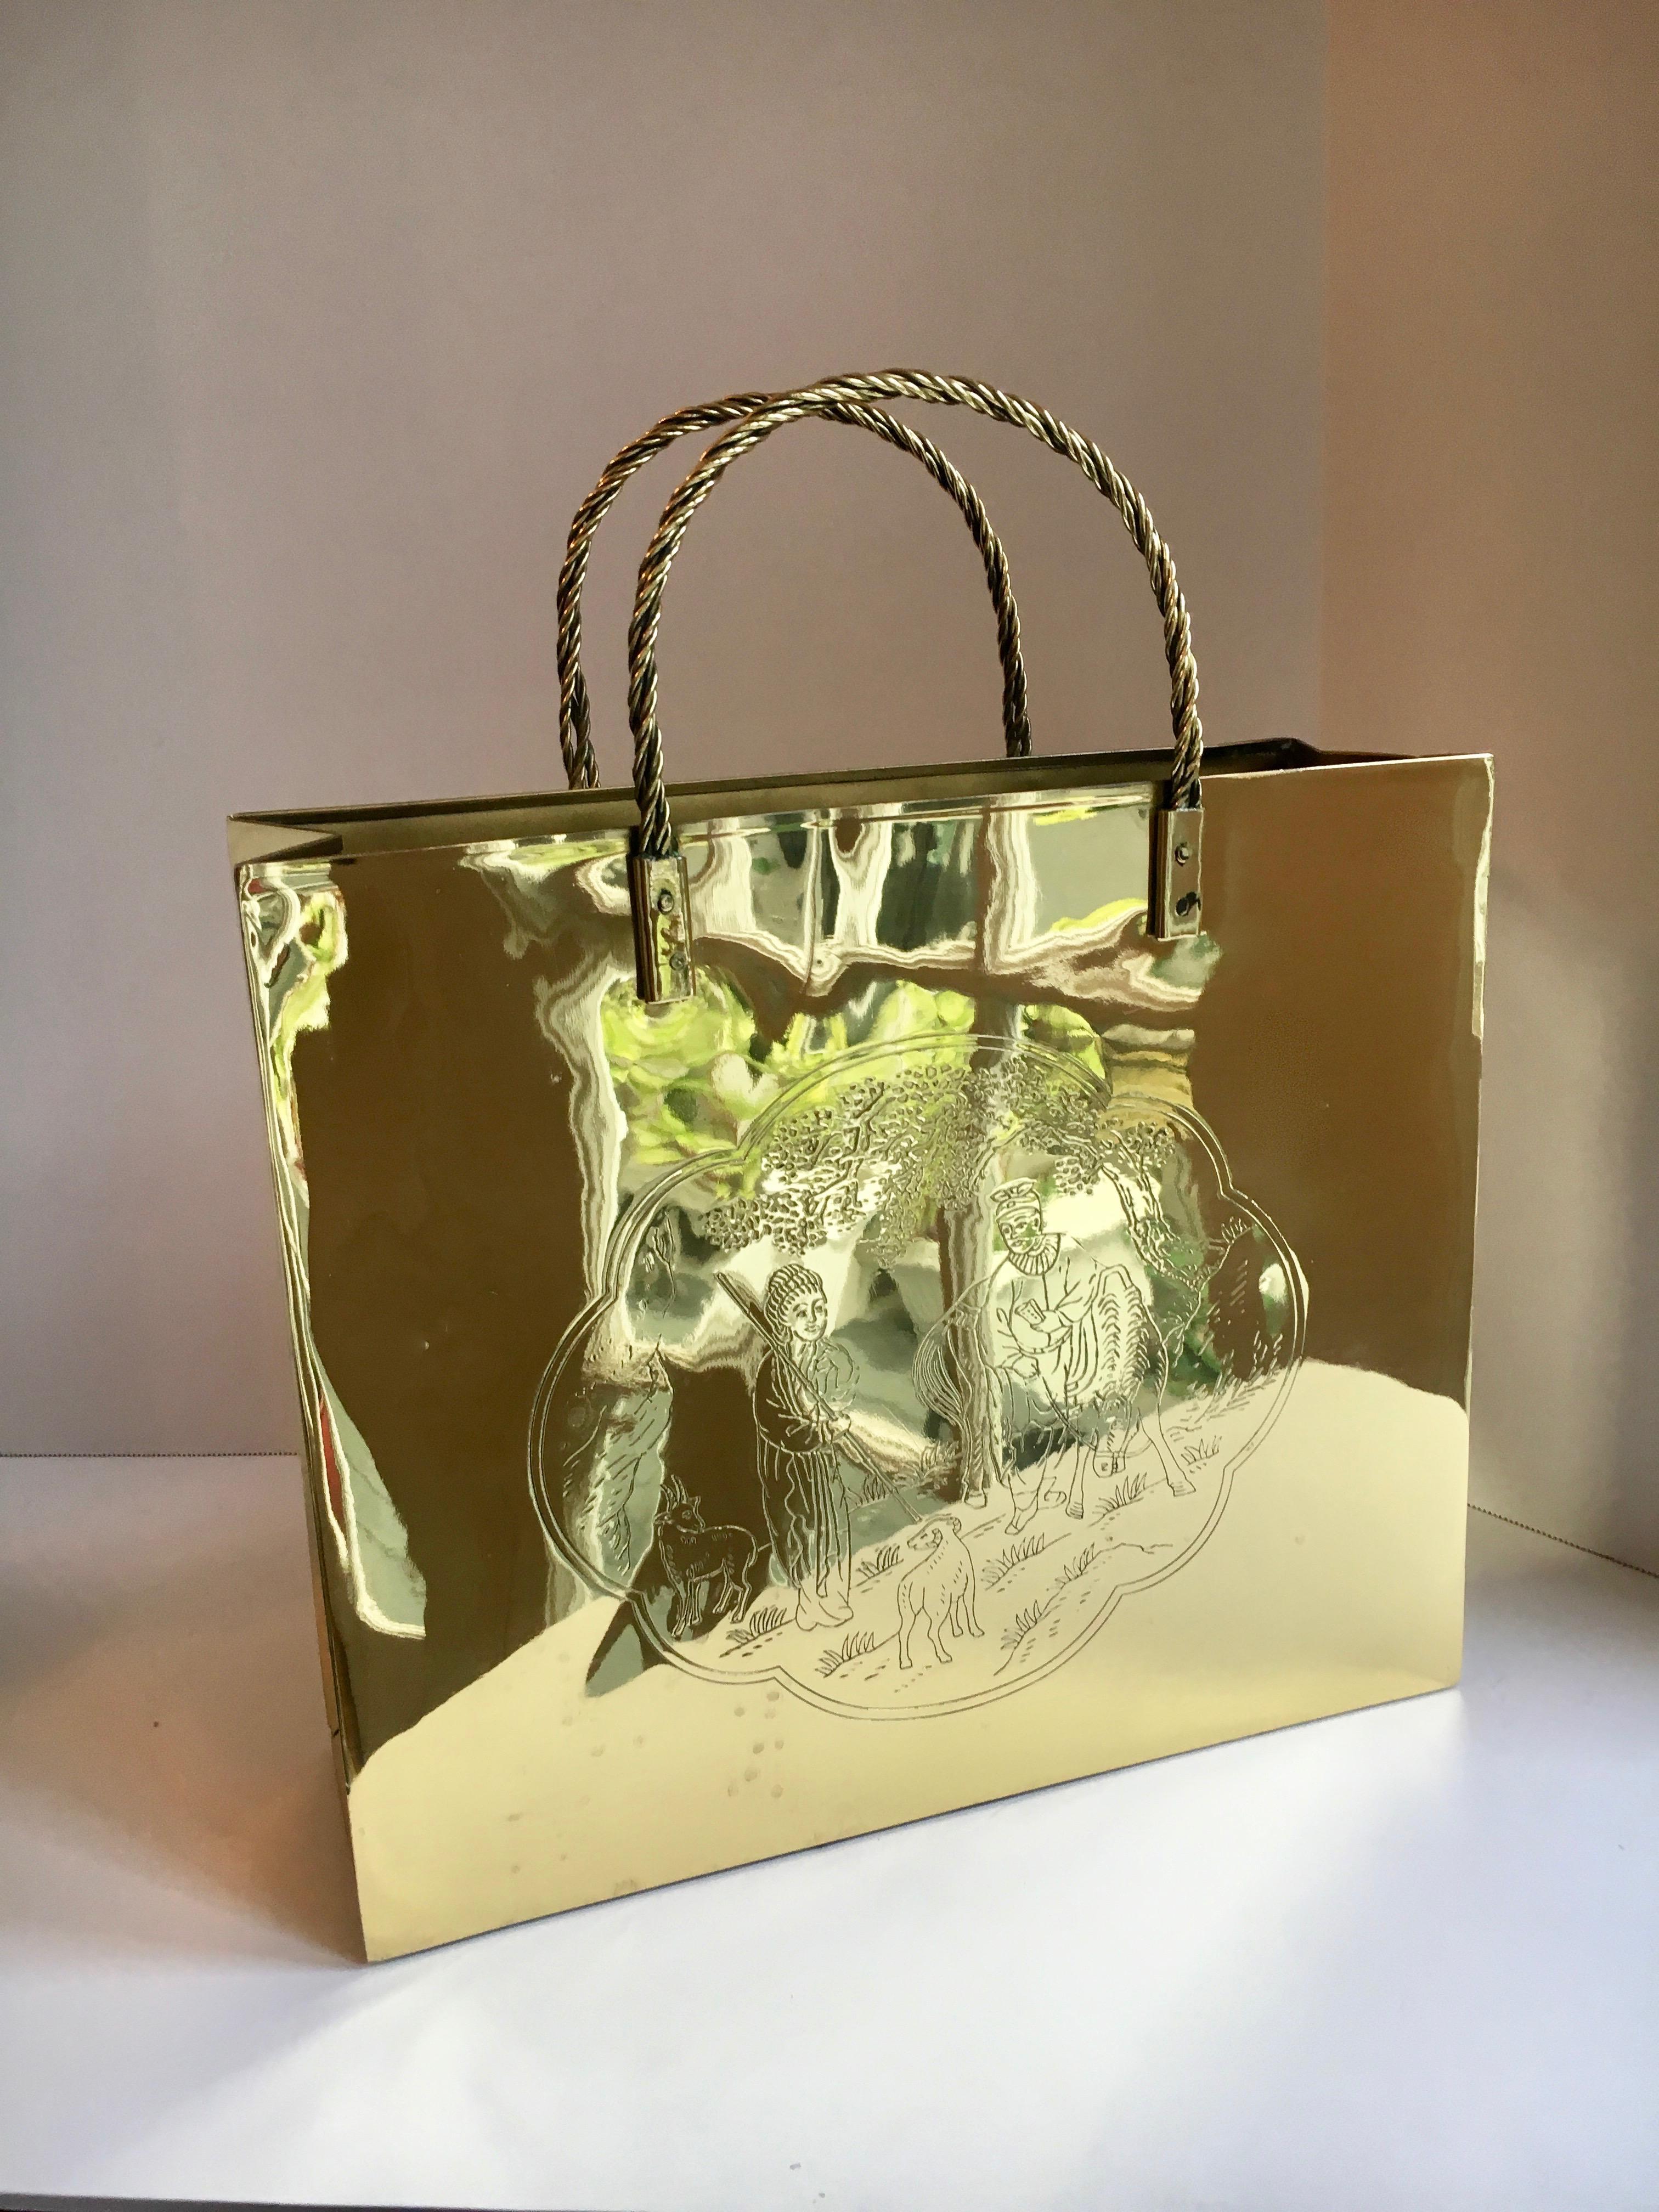 Polished brass waste can - Uniquely designed waste can in the shape of a shopping bag with an Asian motif... perfect for the bedroom or office - disguised as a chic shopping bag. The piece has been newly polished and has few imperfections - one side